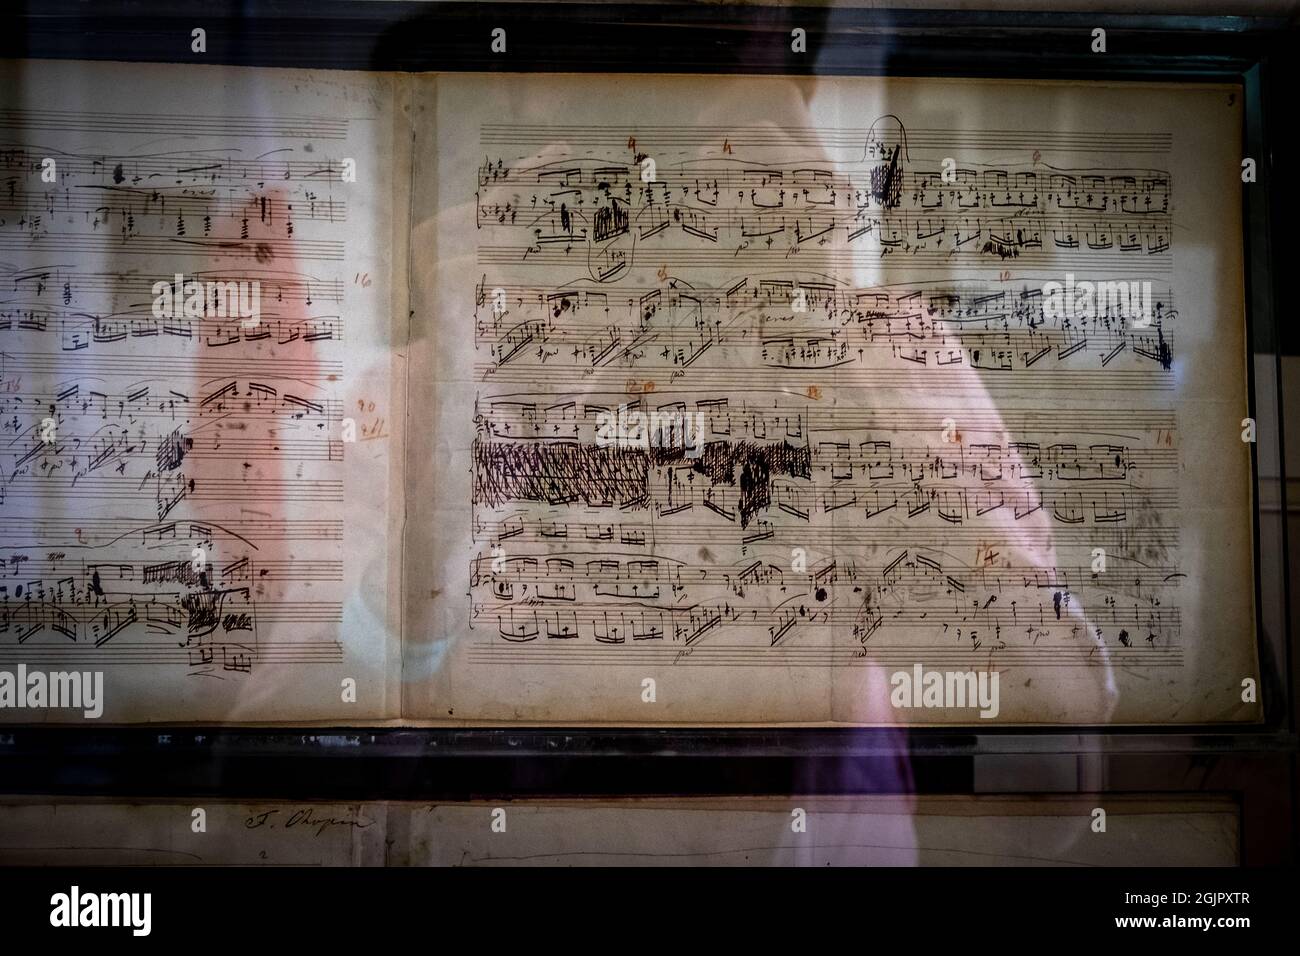 Original manuscript of a composition by Frederic Chopin in the cell where he spent the winter of 1838, Valldemossa, Mallorca, Spain Stock Photo